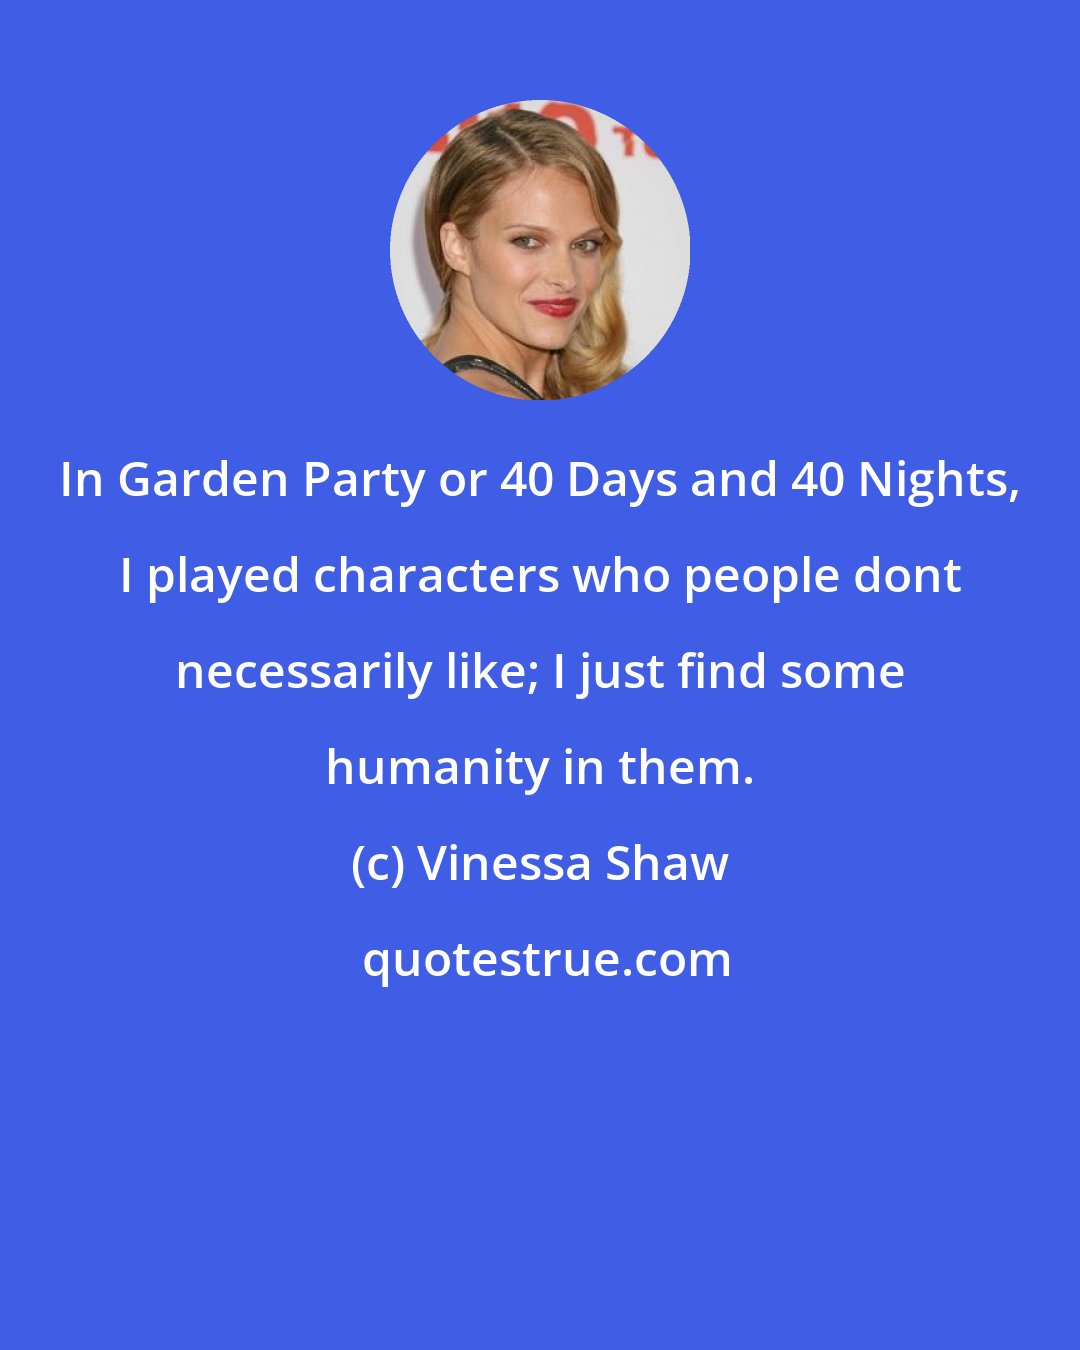 Vinessa Shaw: In Garden Party or 40 Days and 40 Nights, I played characters who people dont necessarily like; I just find some humanity in them.